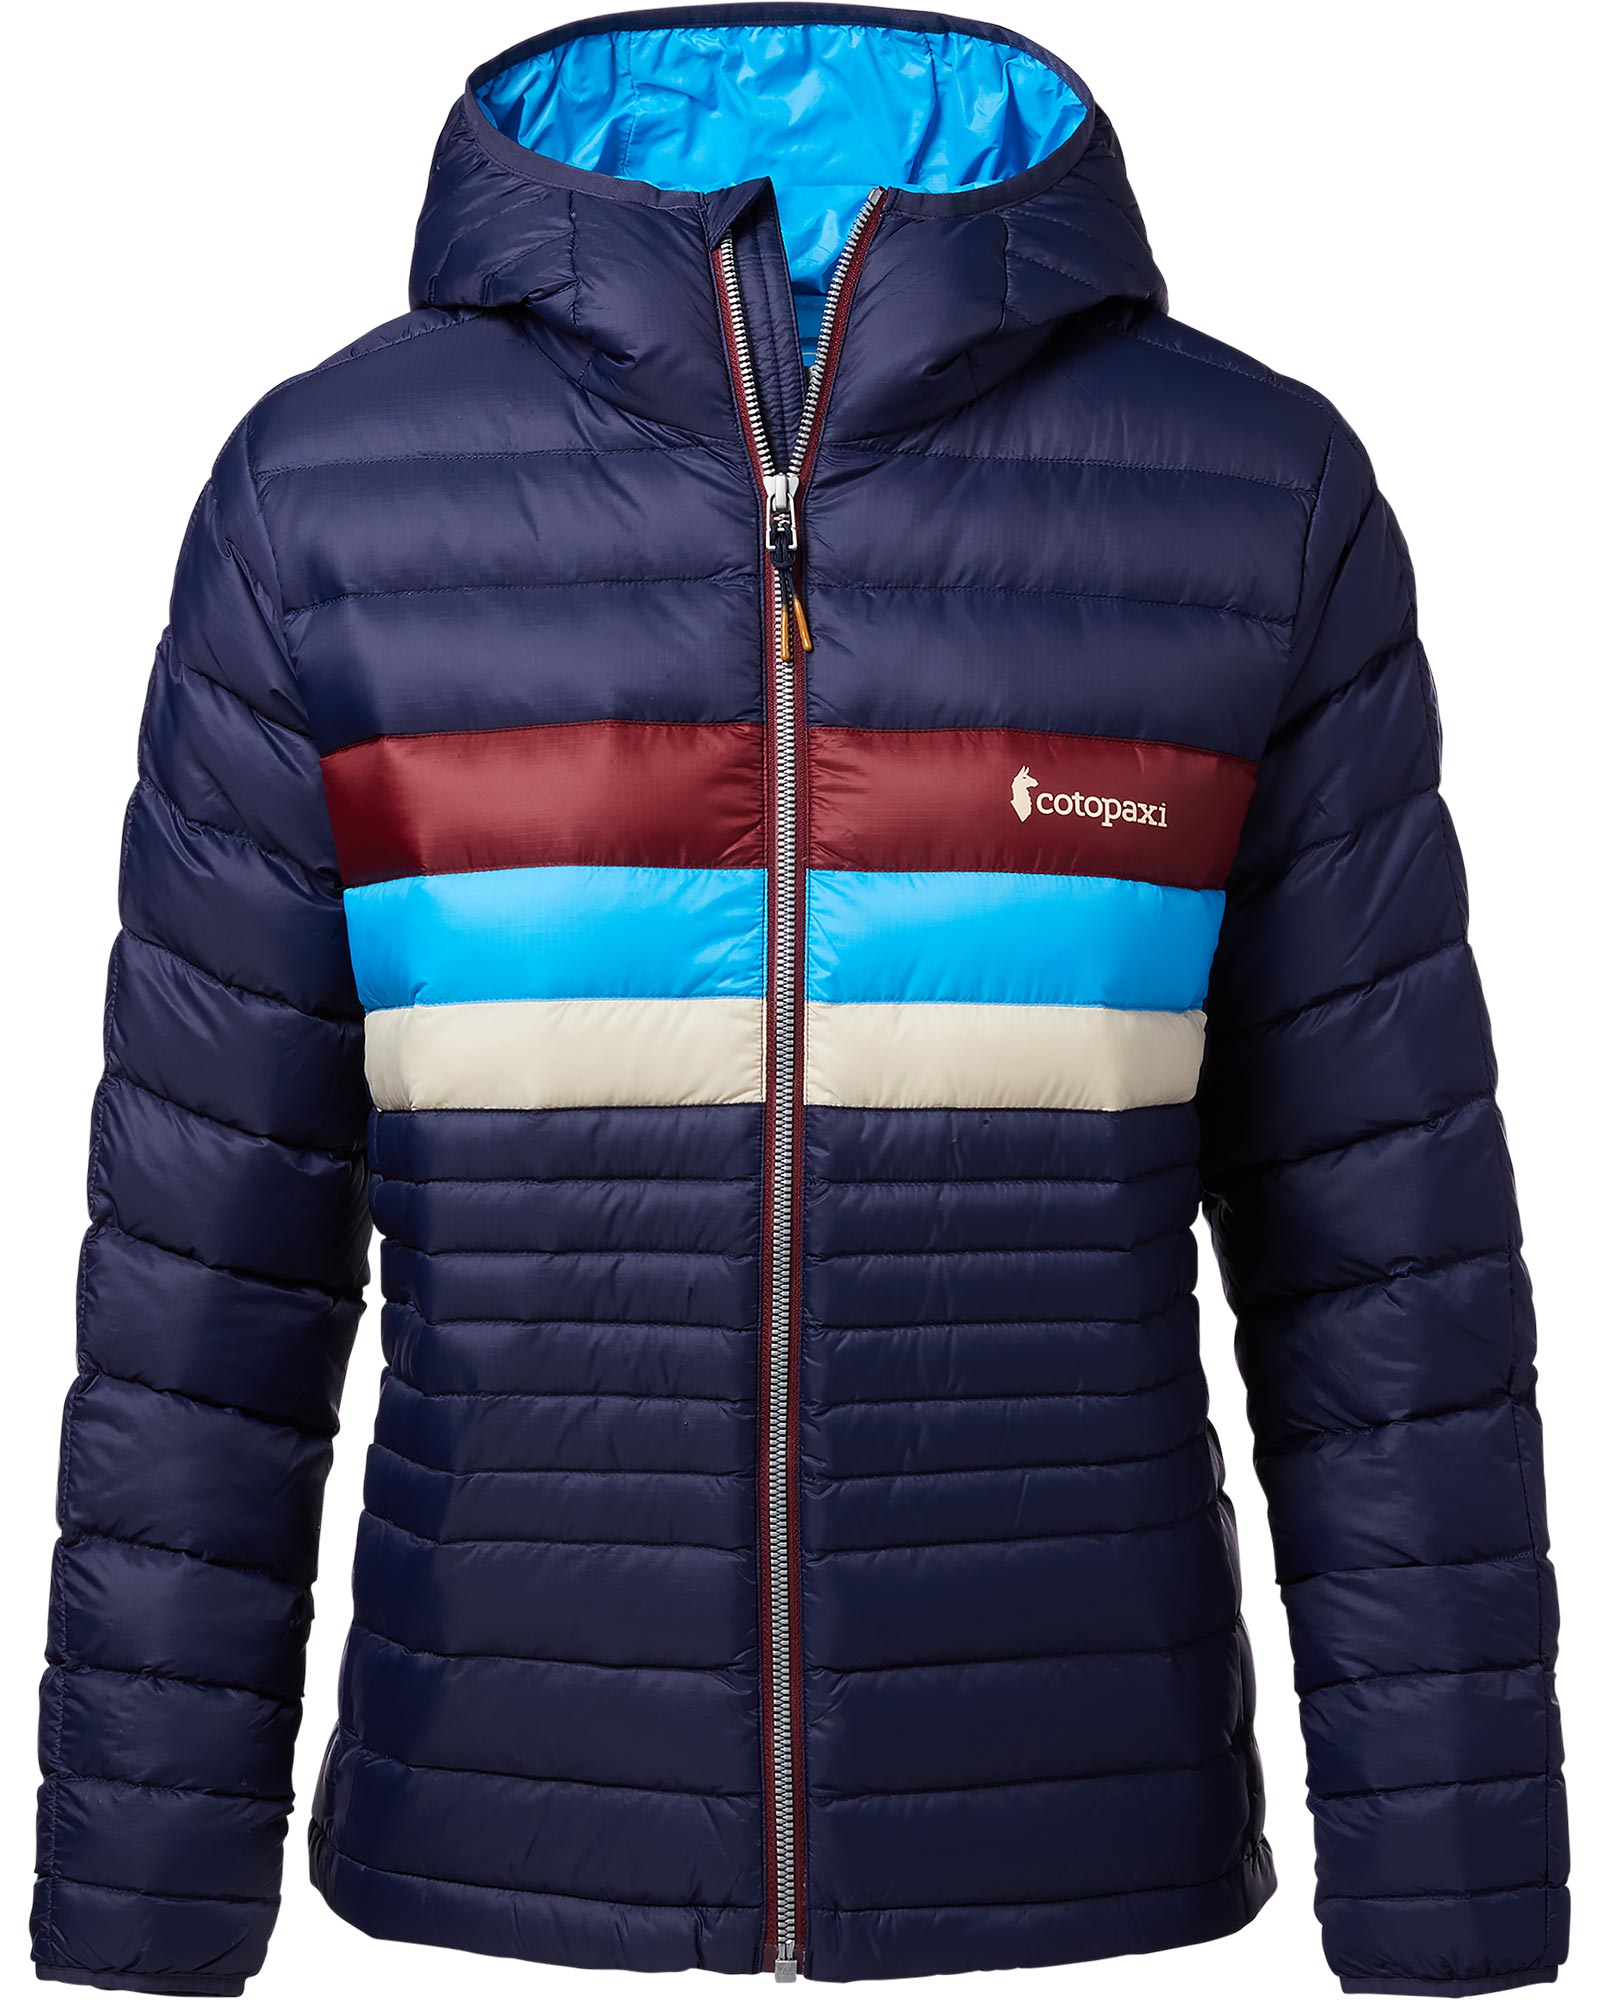 Cotopaxi Fuego Women’s Hooded Down Jacket - Maritime S